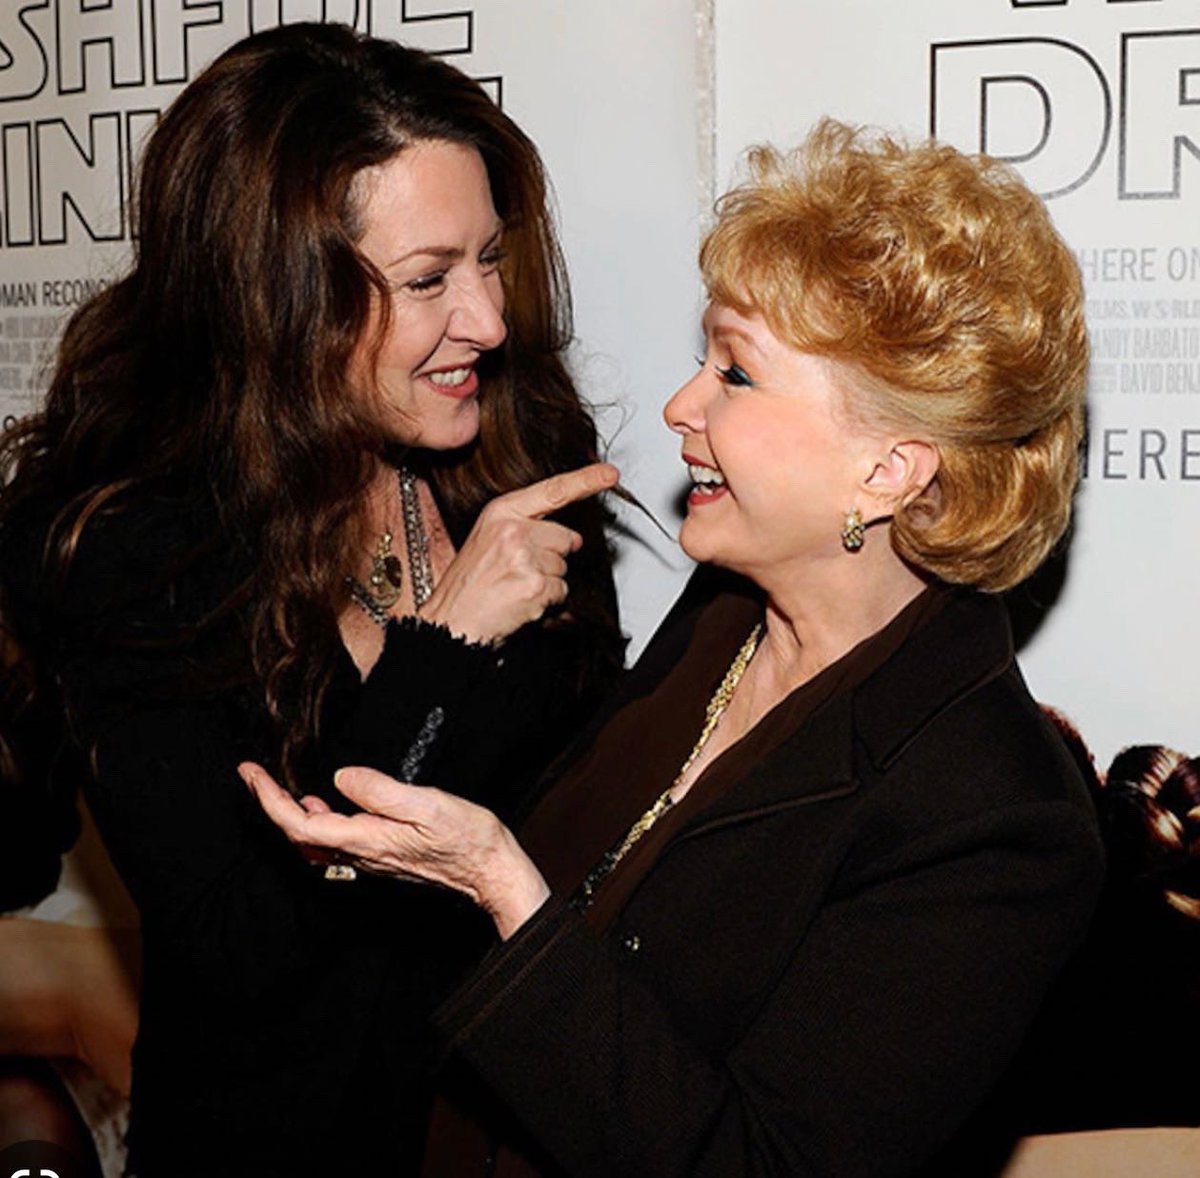 These two angels in my heart always…hard to imagine it has been 6 years #CarrieFisher #CarrieOnForever #DebbieReynolds #abadaba #growingupfisher